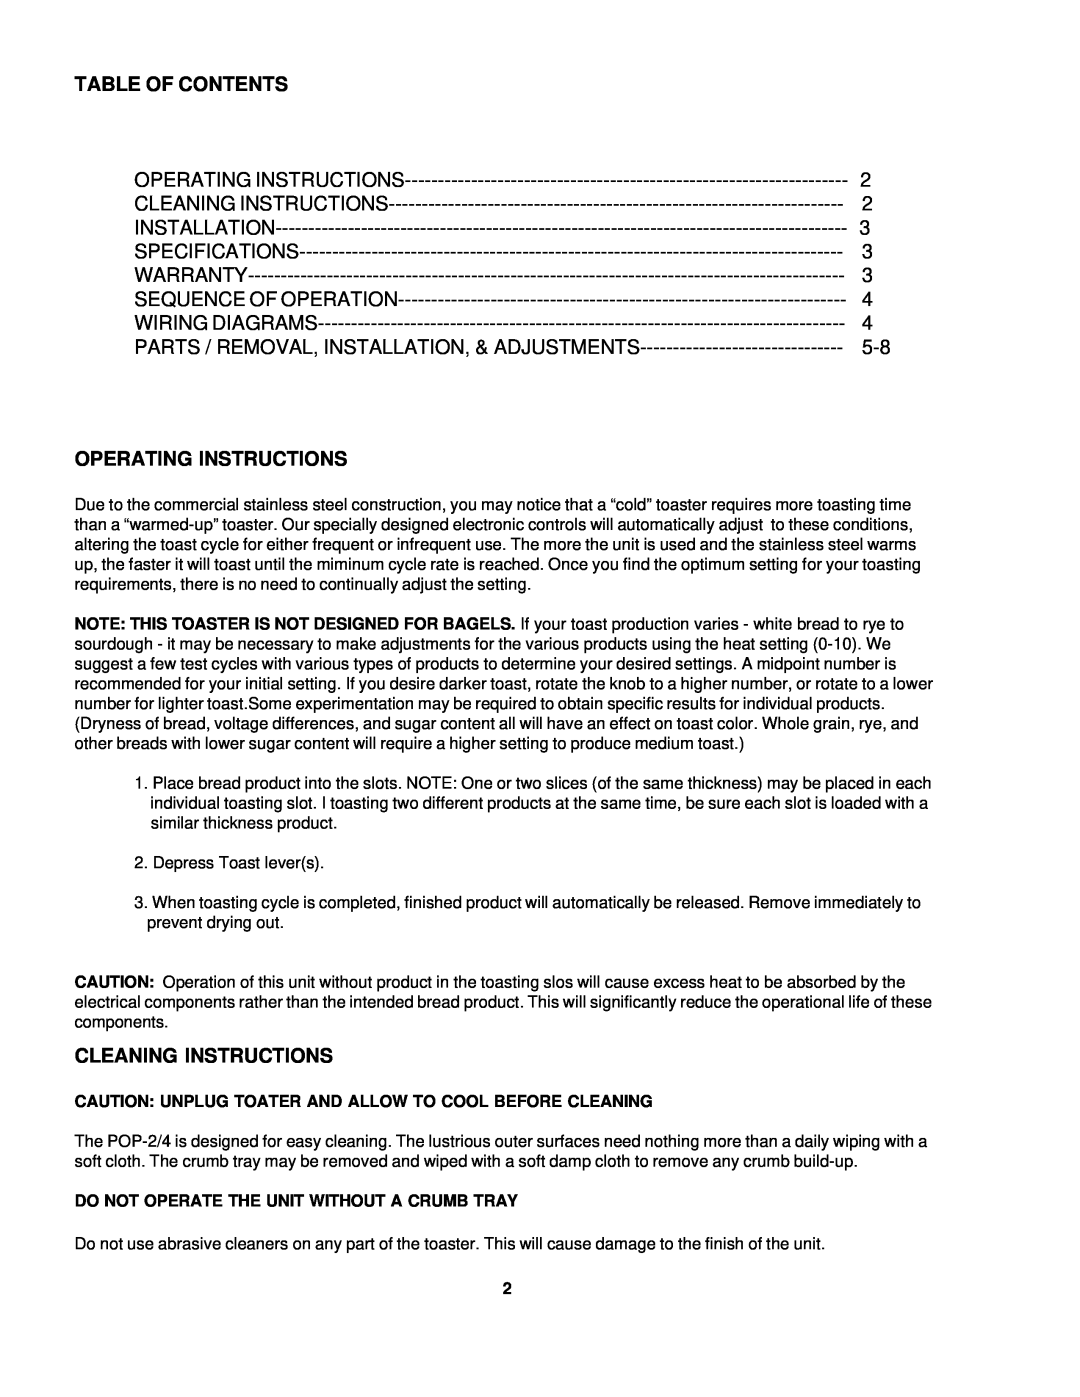 Merco Savory POP-2/4 service manual Table Of Contents, Operating Instructions, Cleaning Instructions 